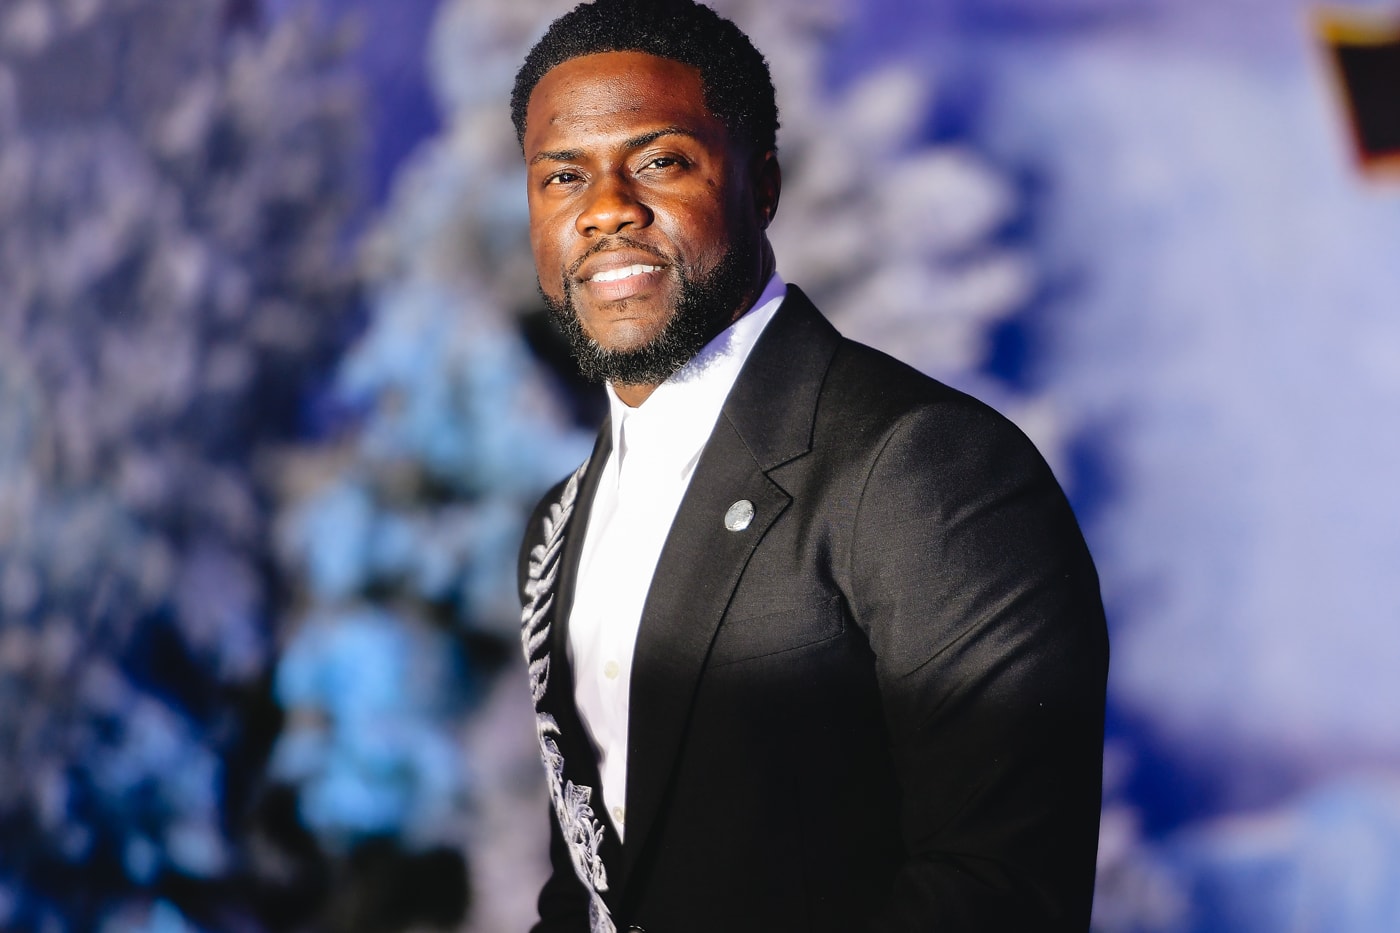 el-p-not-happy-about-kevin-hart-naming-his-new-movie-run-the-jewels